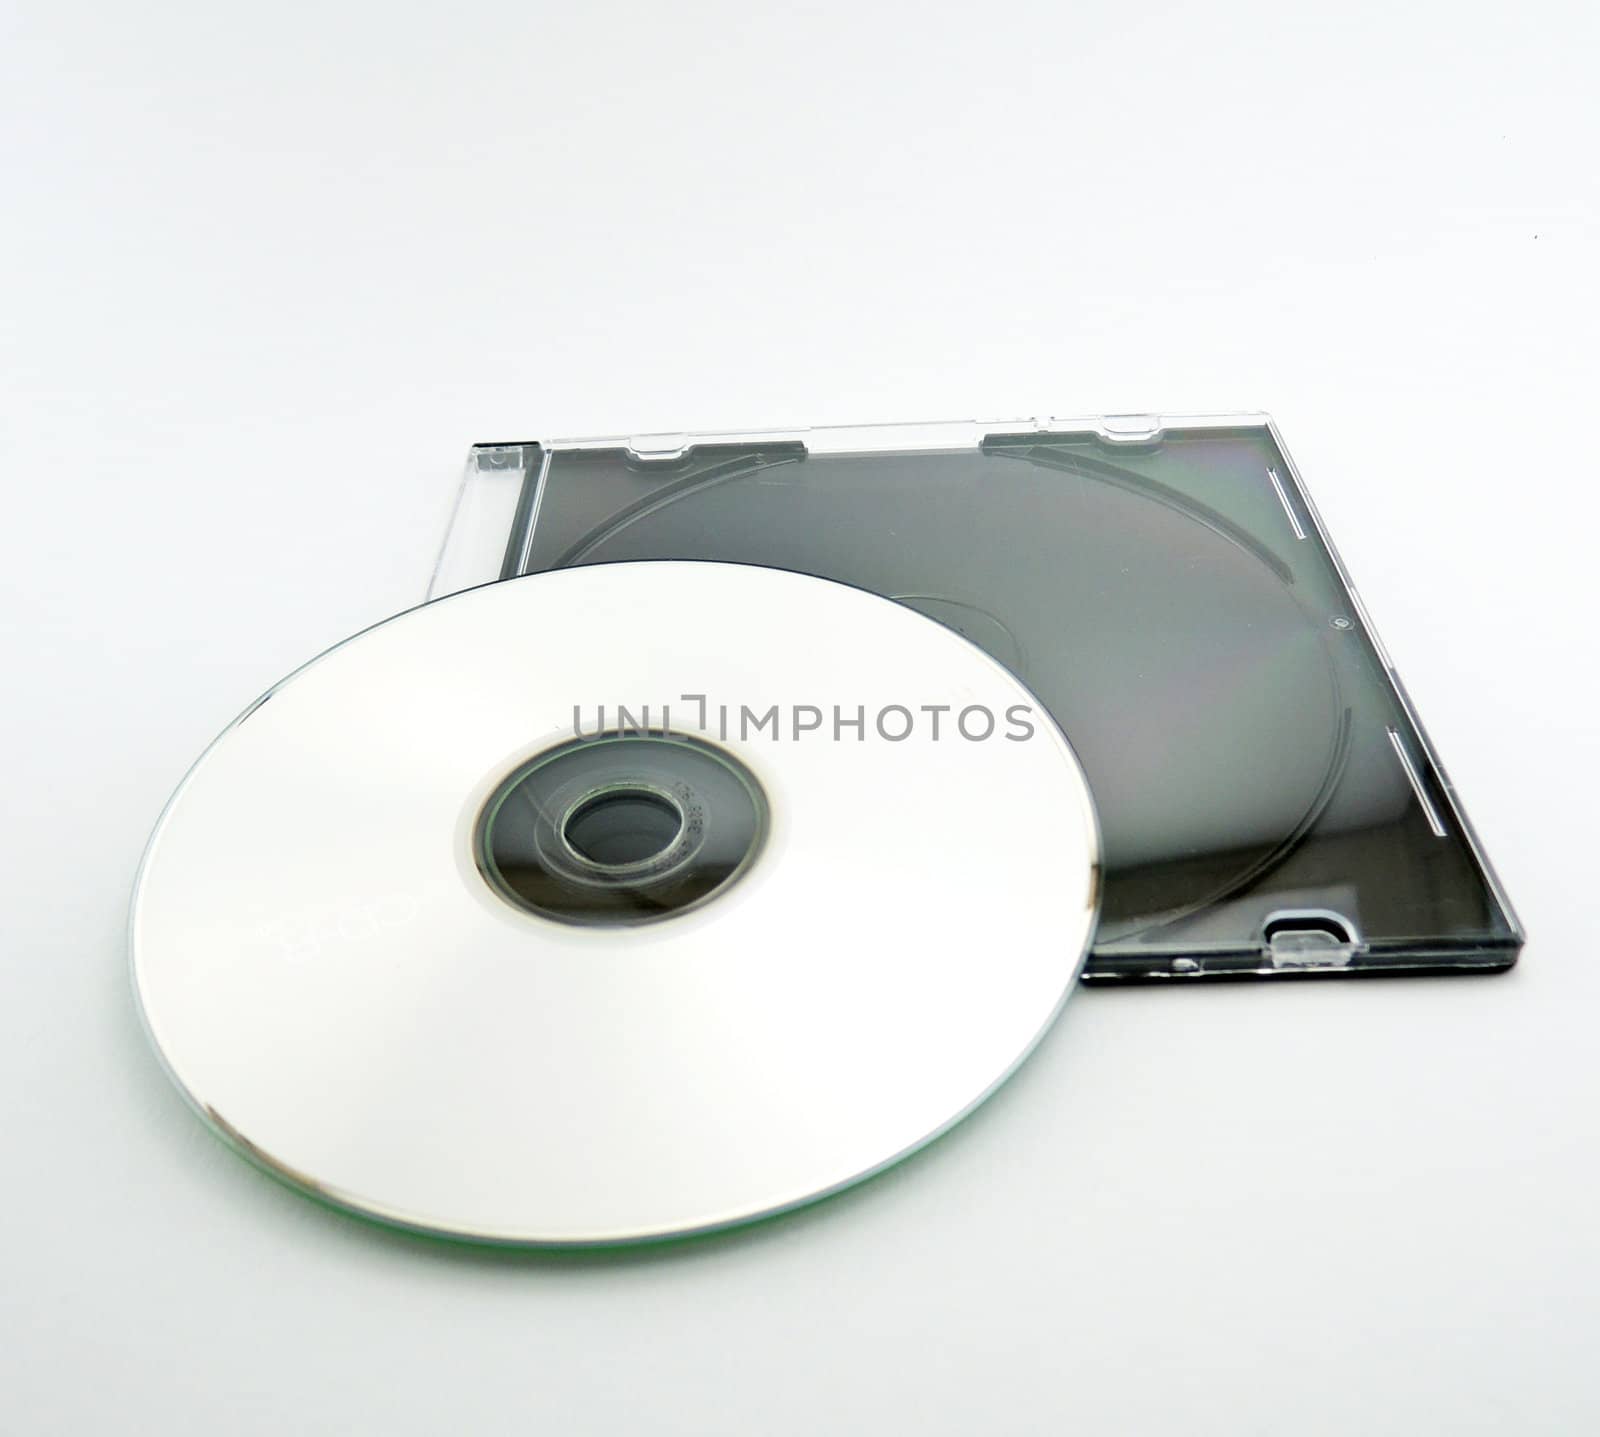 The cd-disk and box  isolated on a white background by MalyDesigner